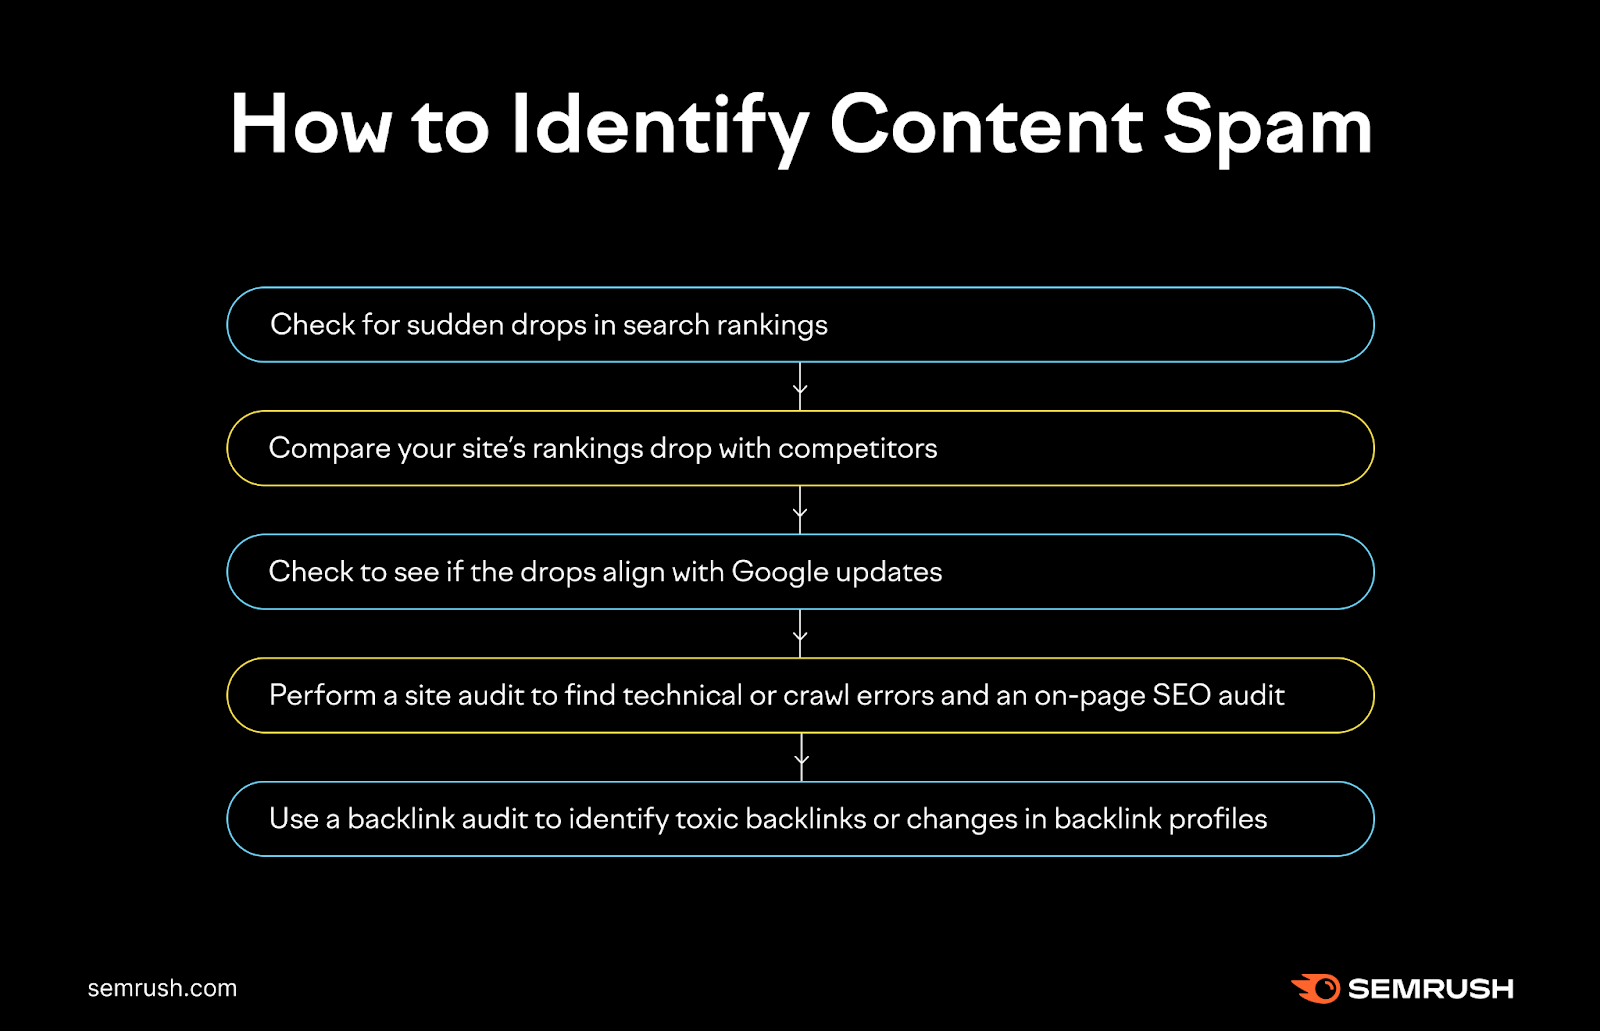 How to identify content spam